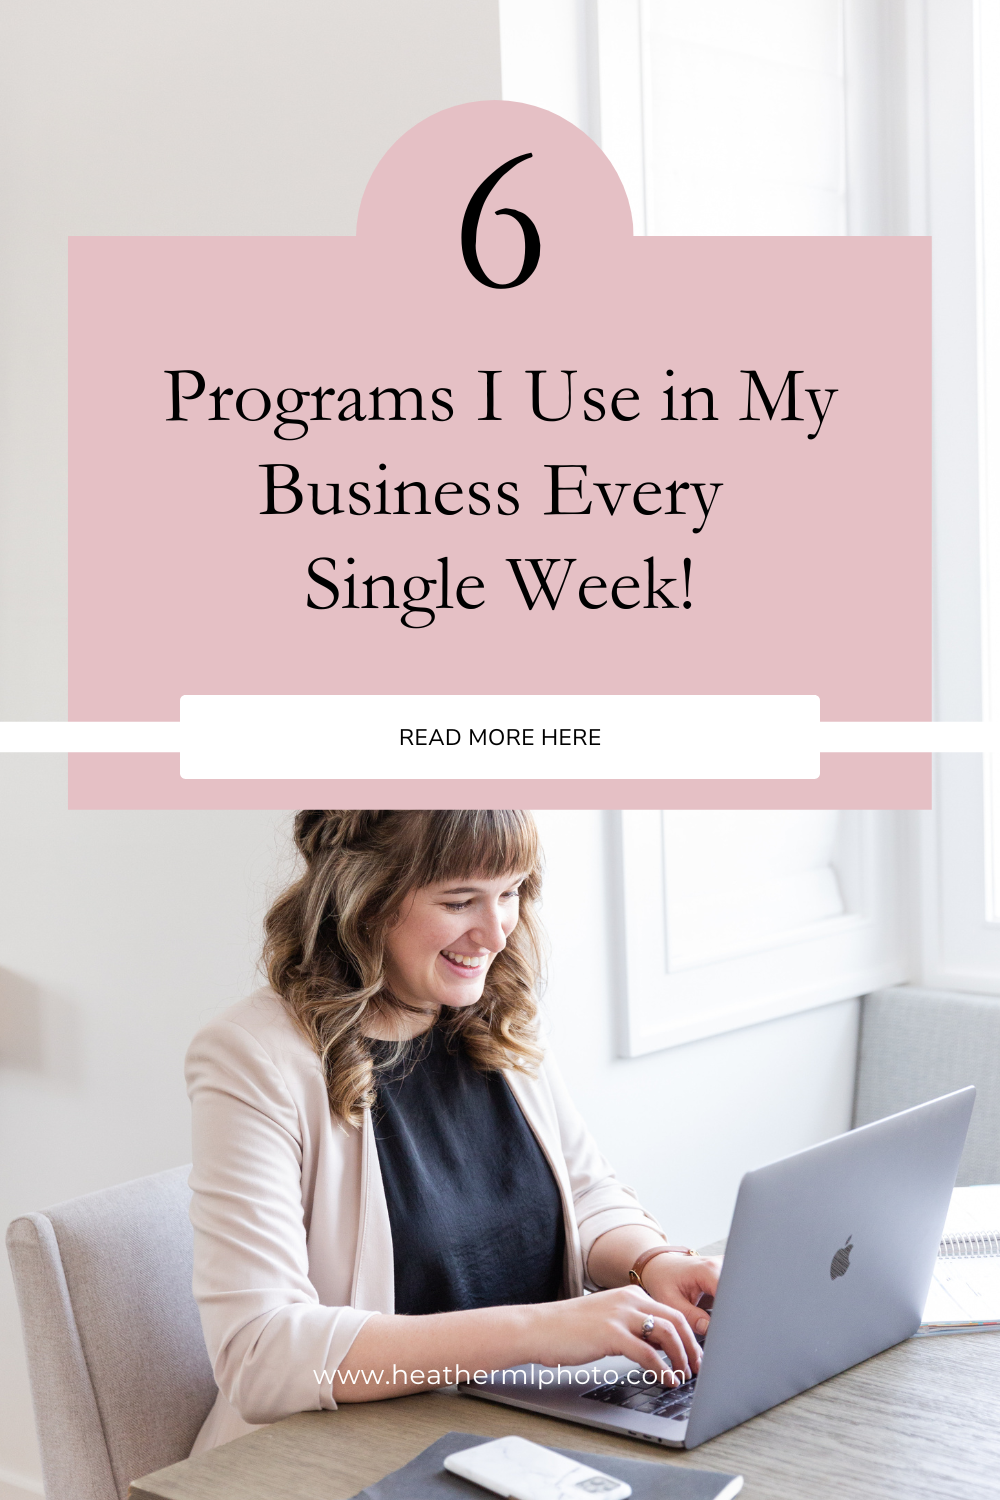 Blog about 6 programs I use in my business every single week